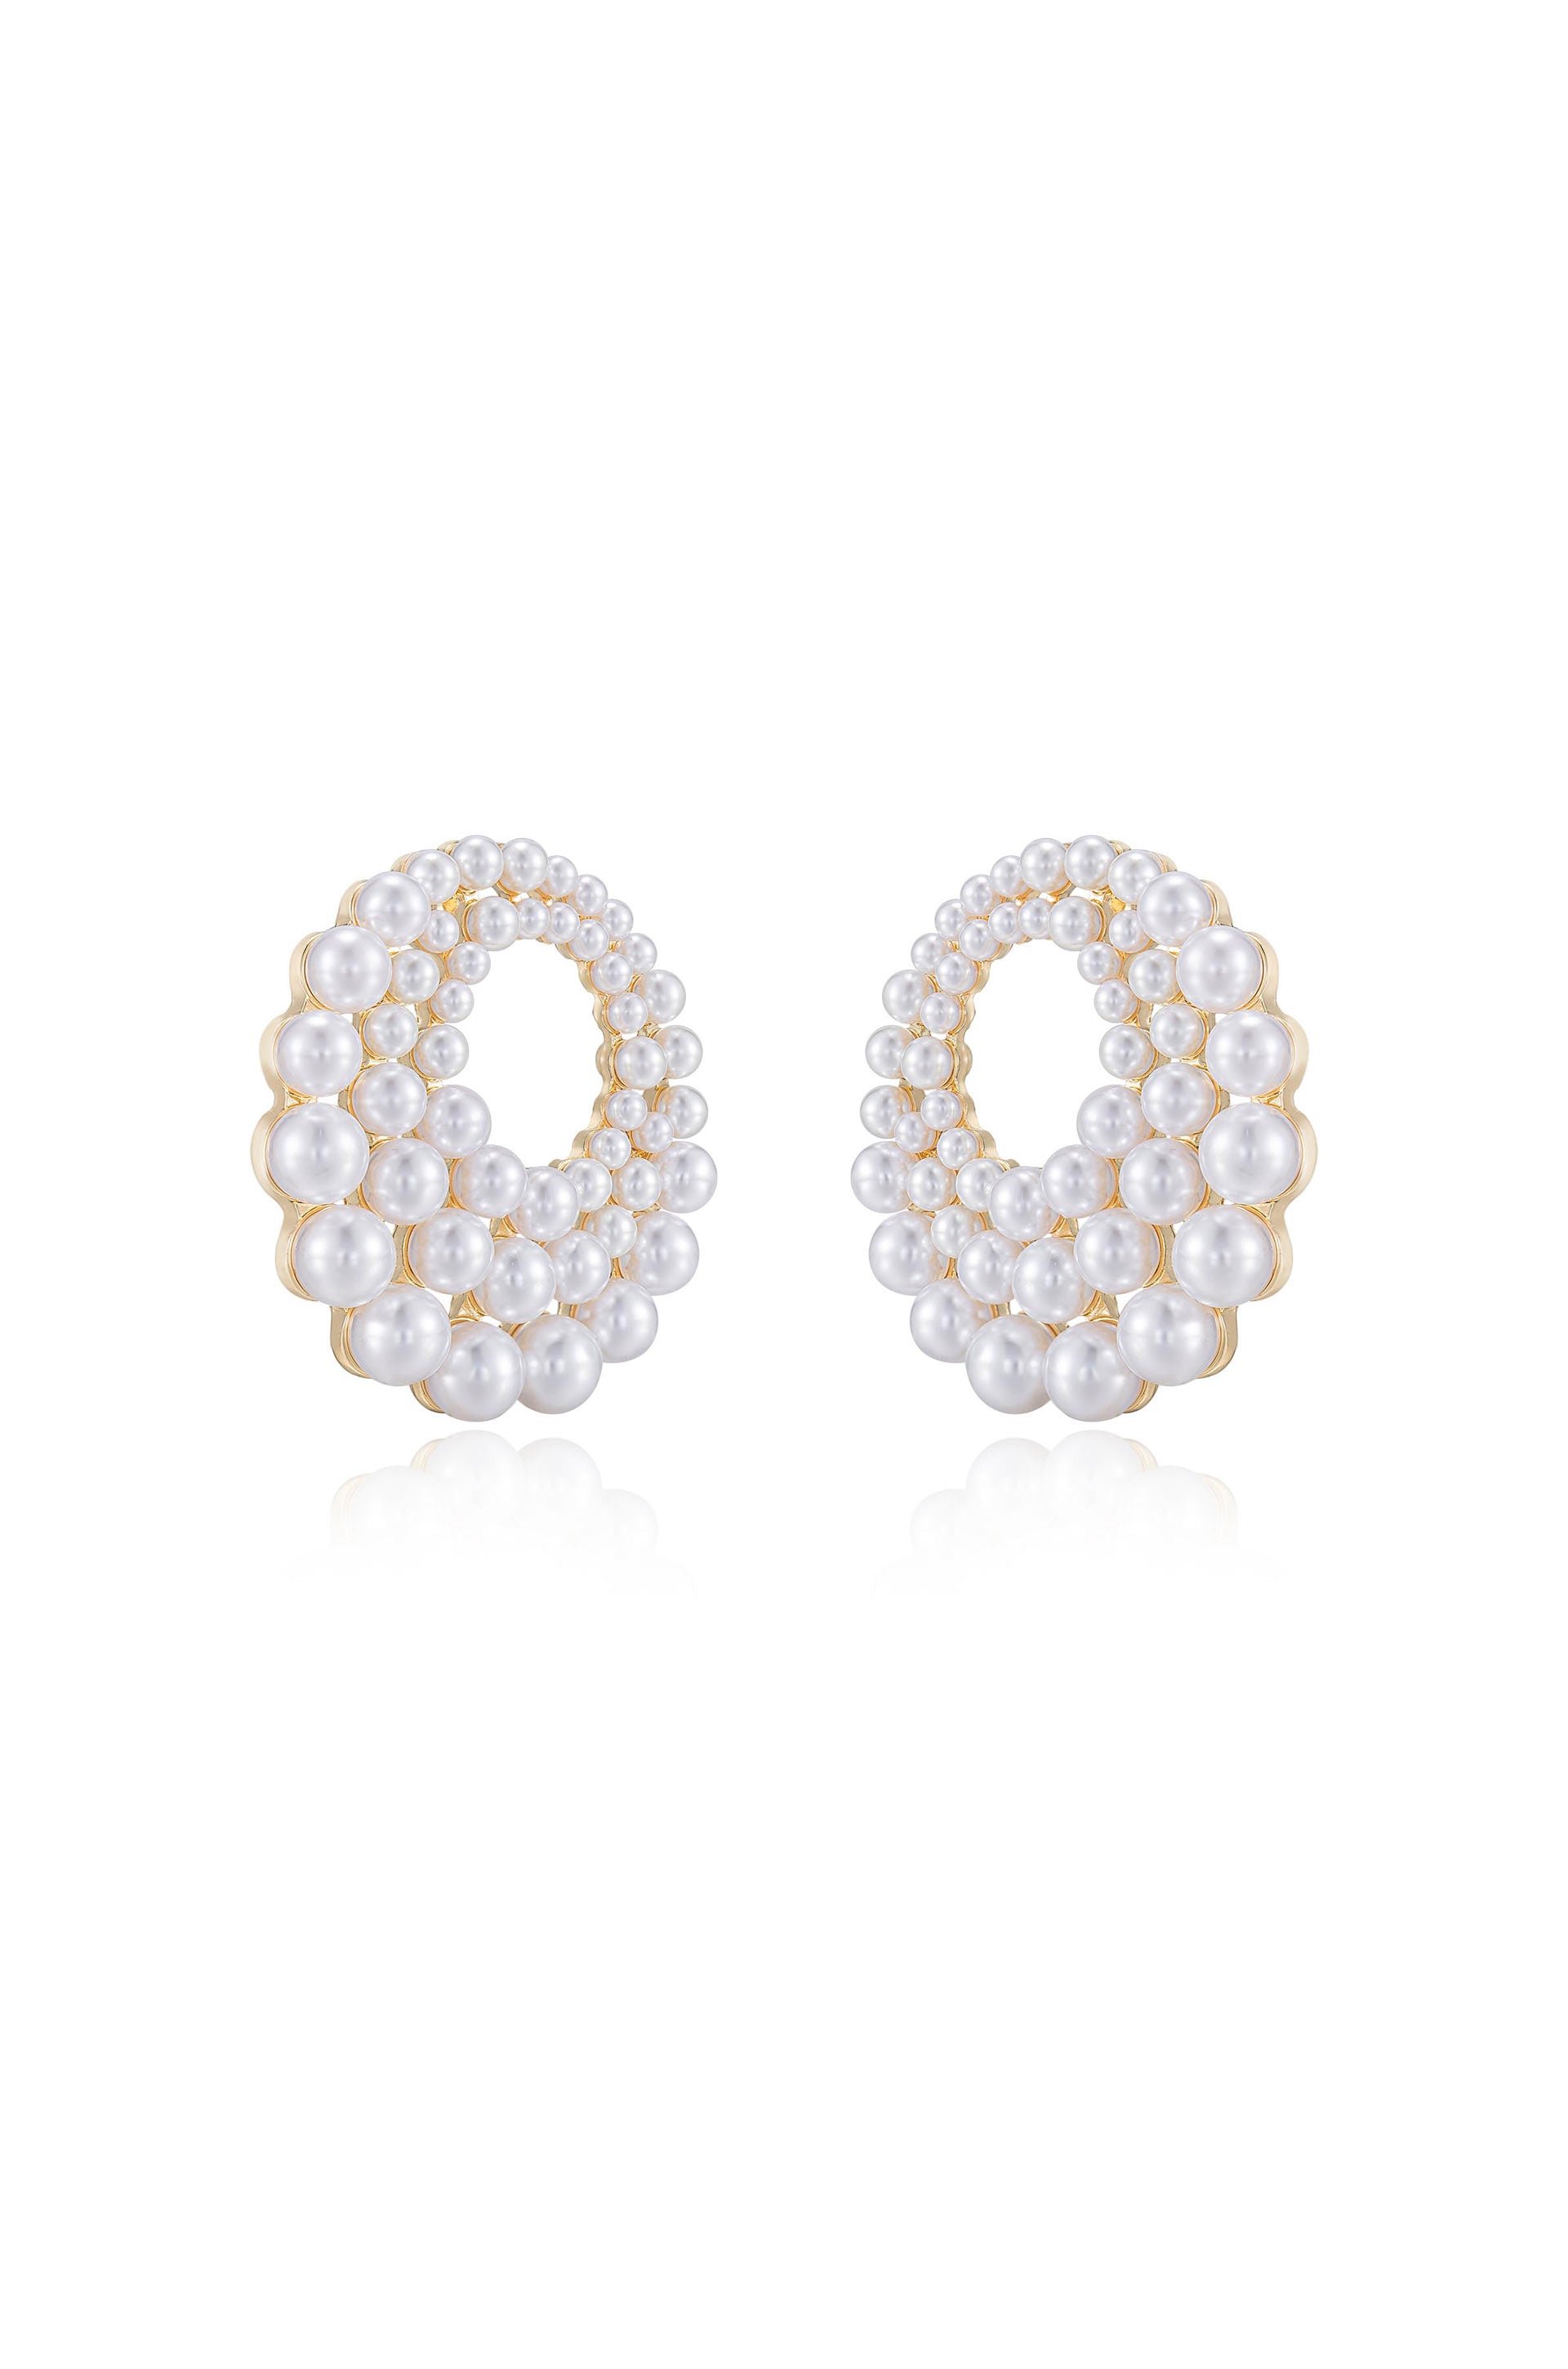 Blushing Pearl 18k Gold Plated Earrings on white side view